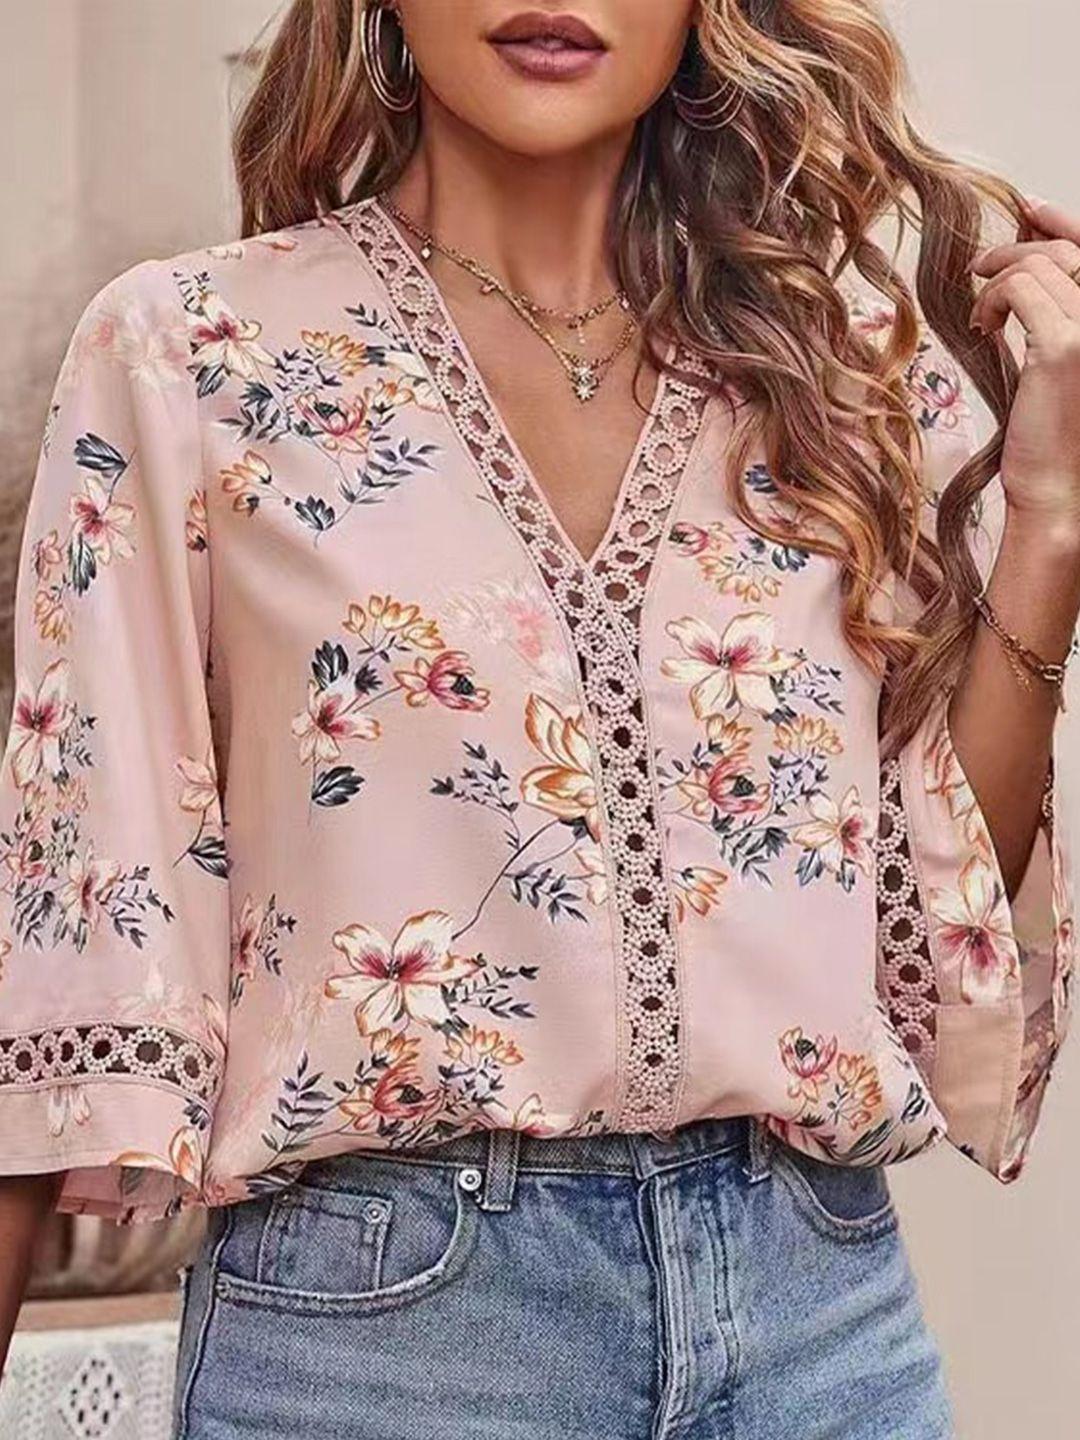 stylecast beige & pink floral print flared sleeve chiffon top